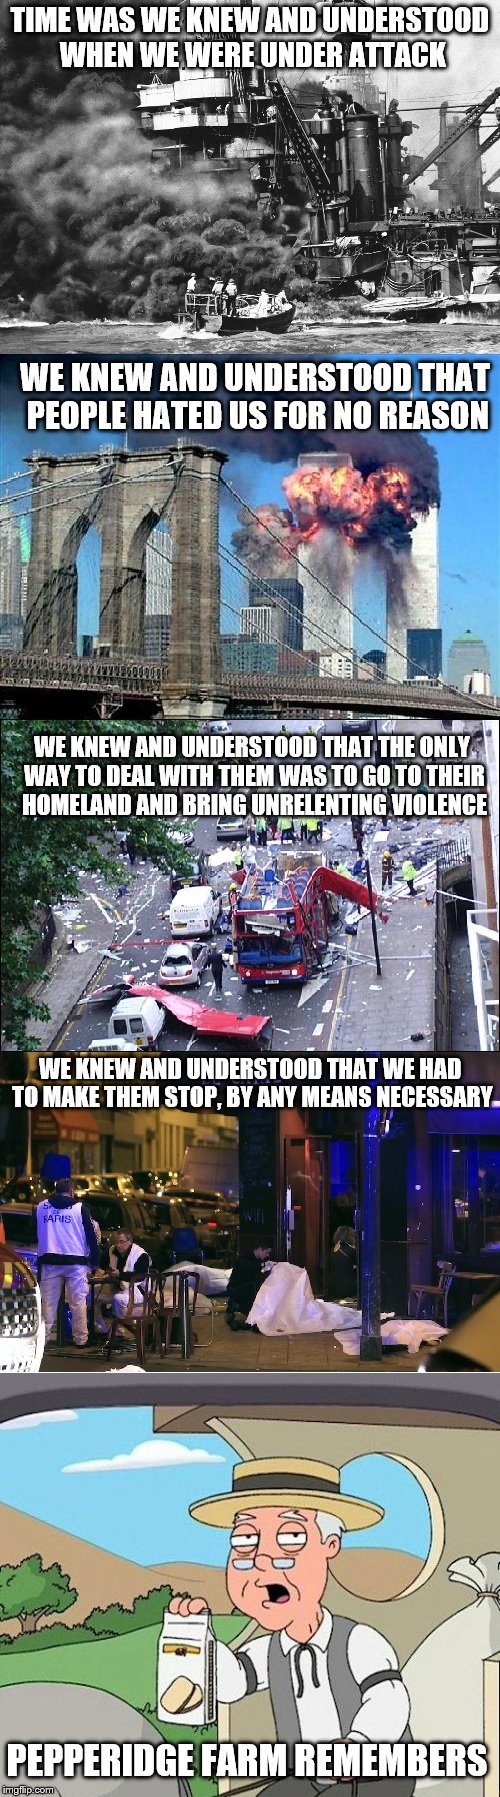 We need to stop these terrorists, any way we can... | TIME WAS WE KNEW AND UNDERSTOOD WHEN WE WERE UNDER ATTACK WE KNEW AND UNDERSTOOD THAT PEOPLE HATED US FOR NO REASON WE KNEW AND UNDERSTOOD T | image tagged in terrorism,politics | made w/ Imgflip meme maker